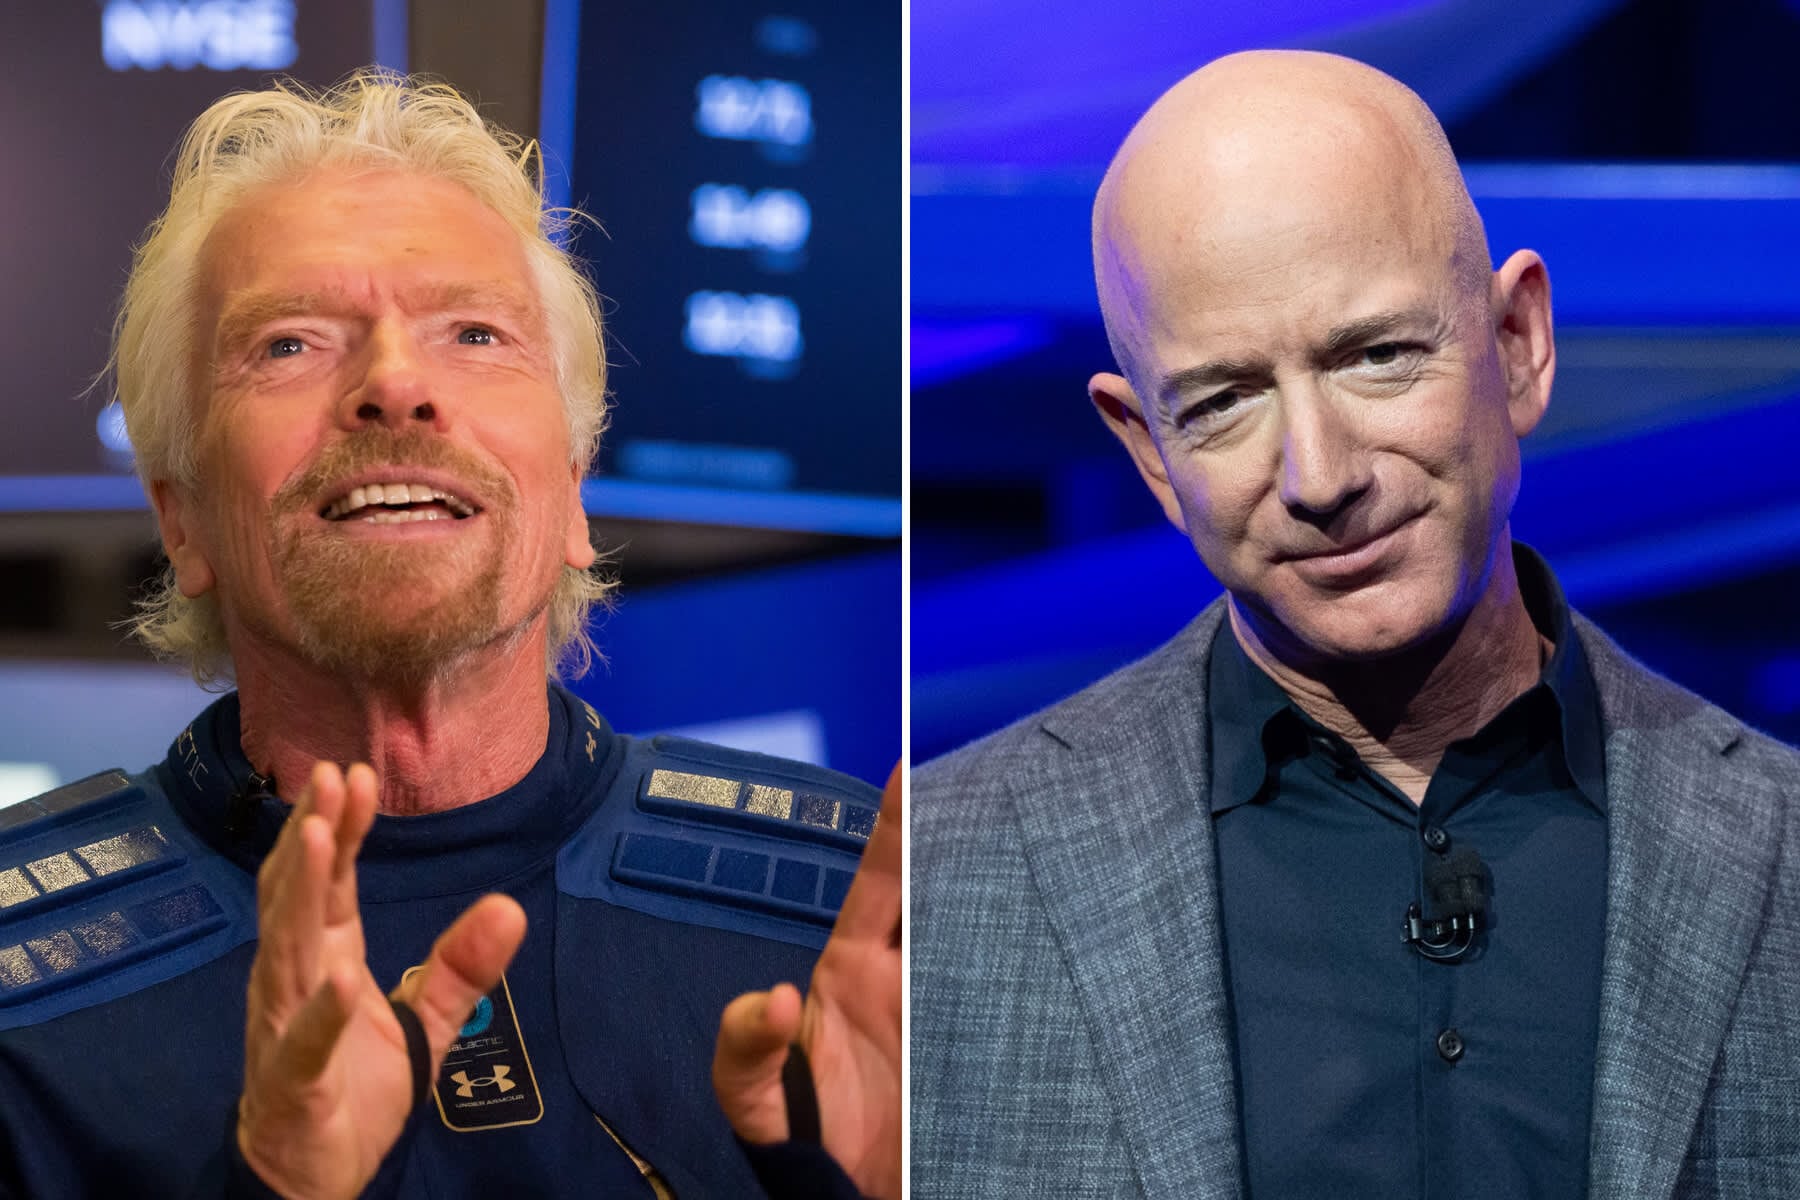 Is Sir Richard Branson Beating Jeff Bezos as First Billionaire in Space?